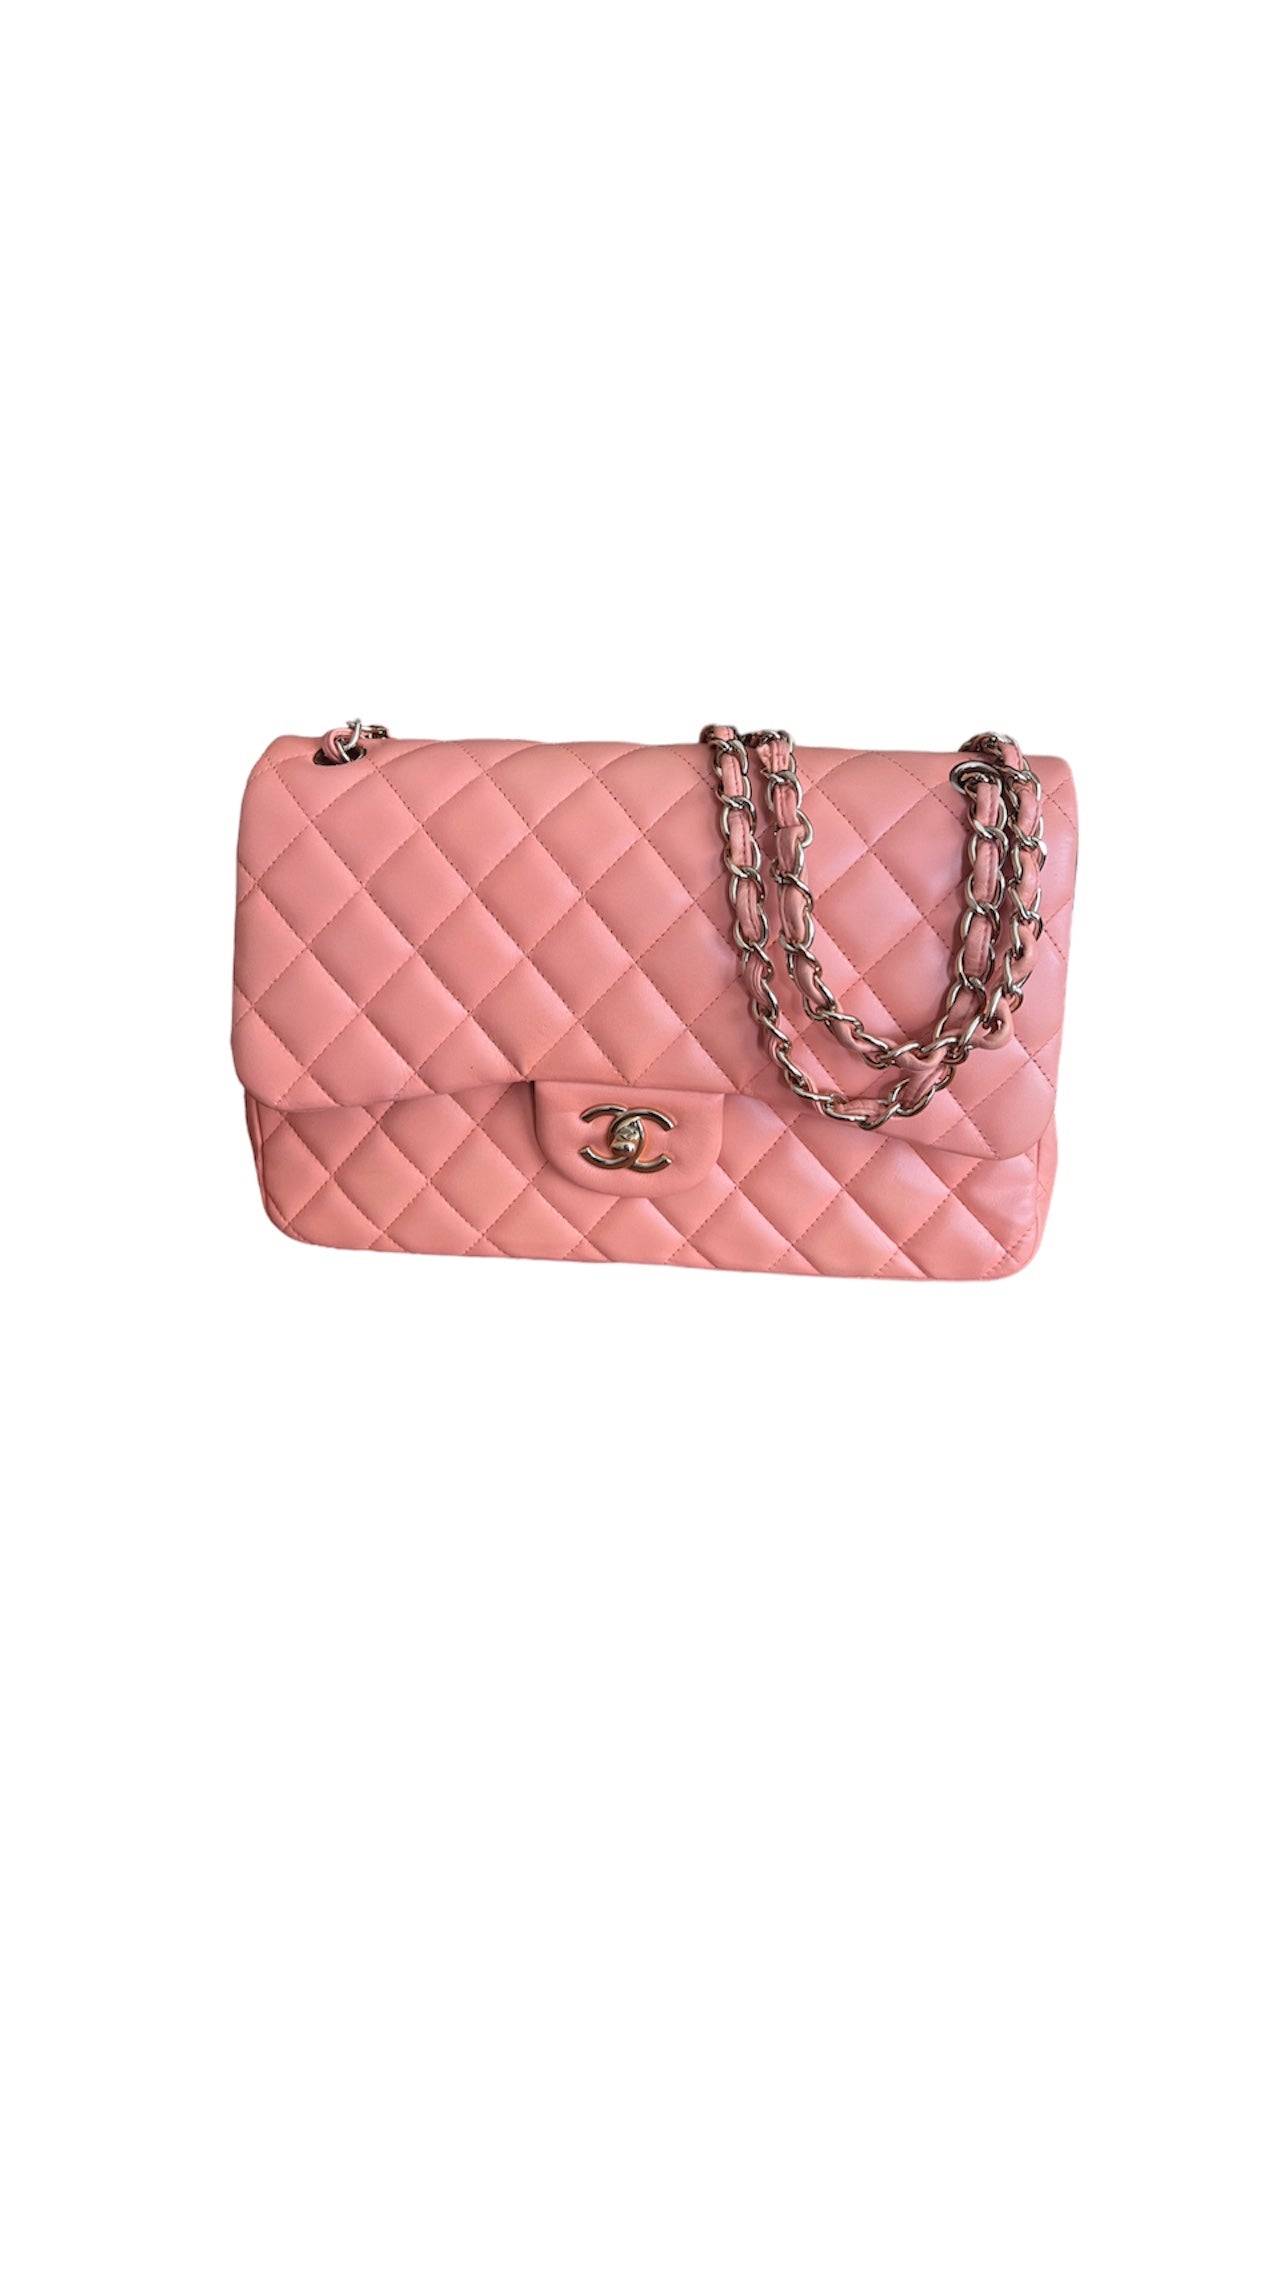 Chanel Timeless Classic Jumbo Flap Bag – LuxCollector Vintage